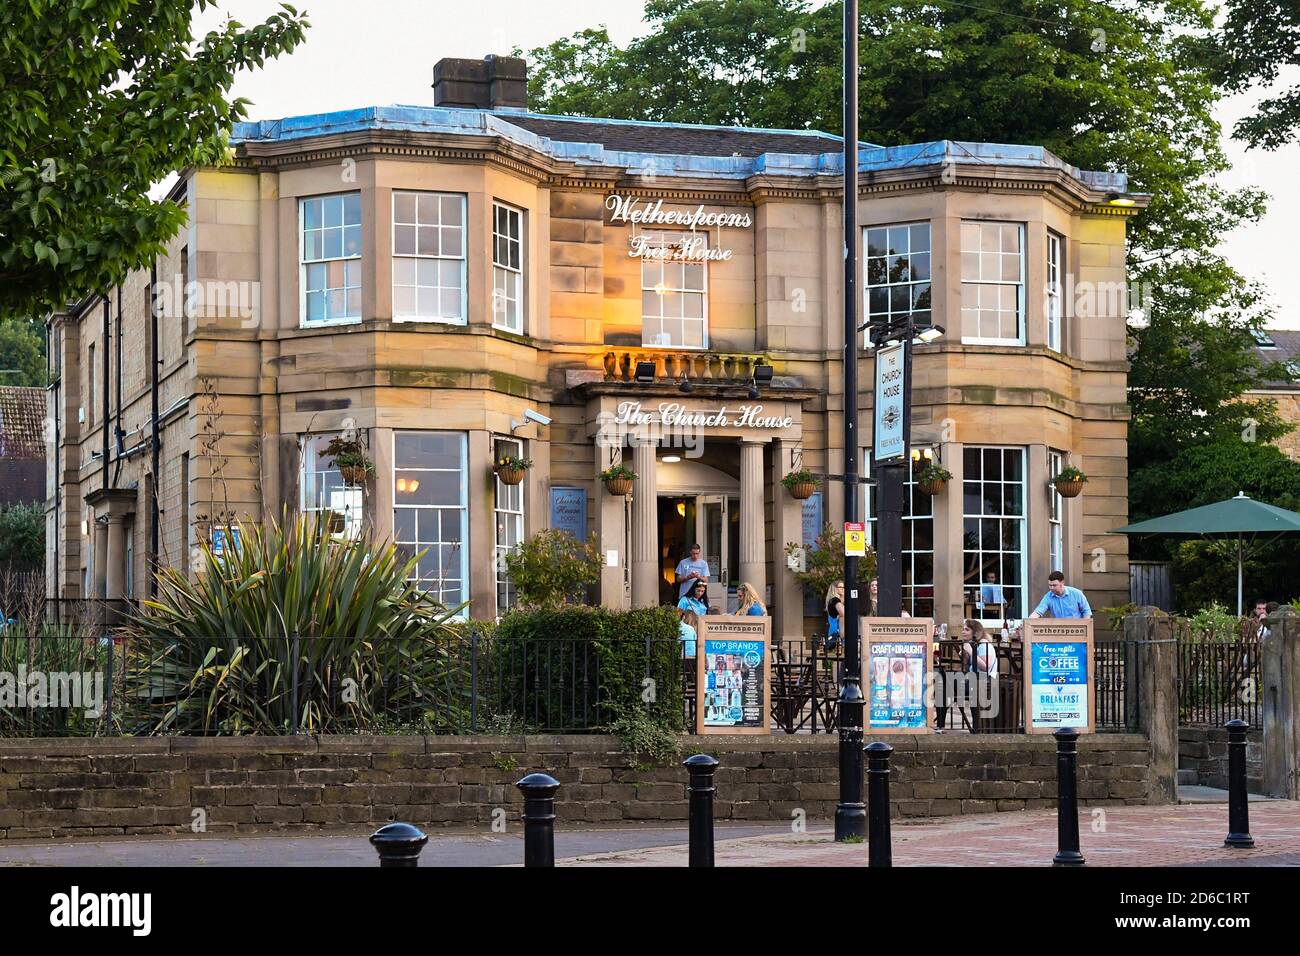 Wetherspoons Pub The Church House, Wath upon Dearne, Rotherham, South Yorkshire, England, Großbritannien Stockfoto